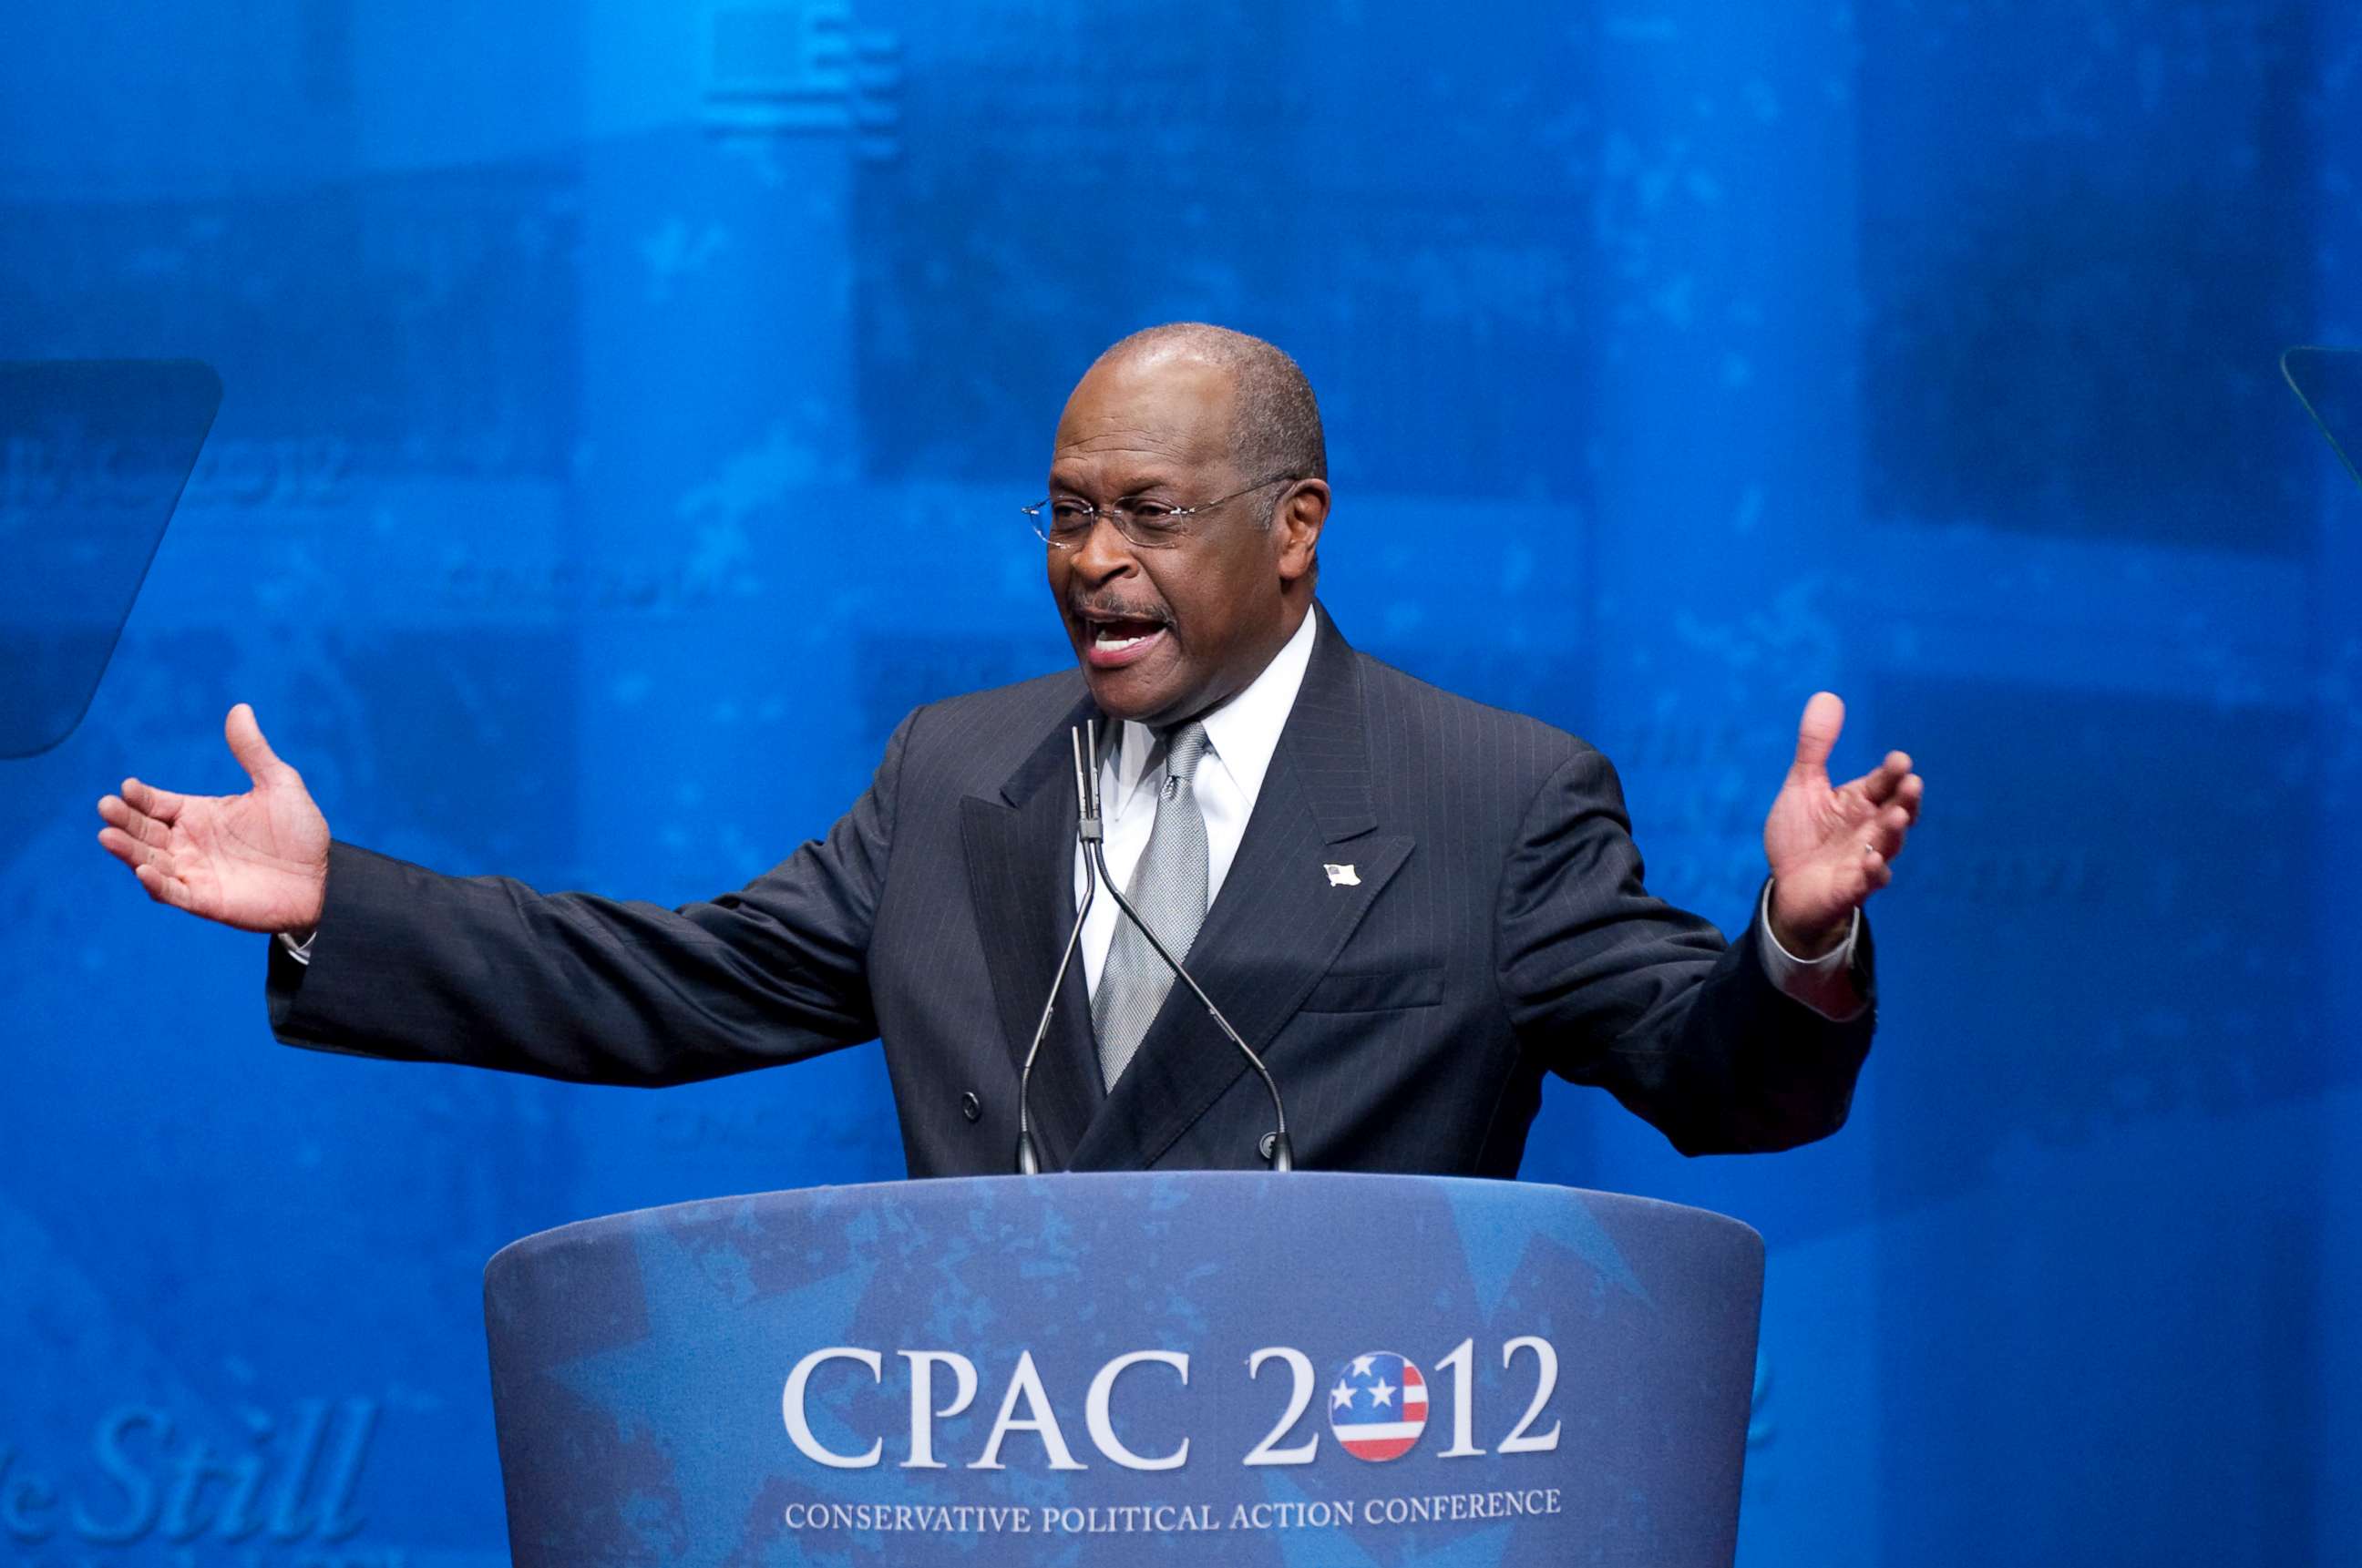 PHOTO: In this Feb. 9, 2012, file photo, Herman Cain speaks at the 2012 Conservative Political Action Conference in Washington, DC.